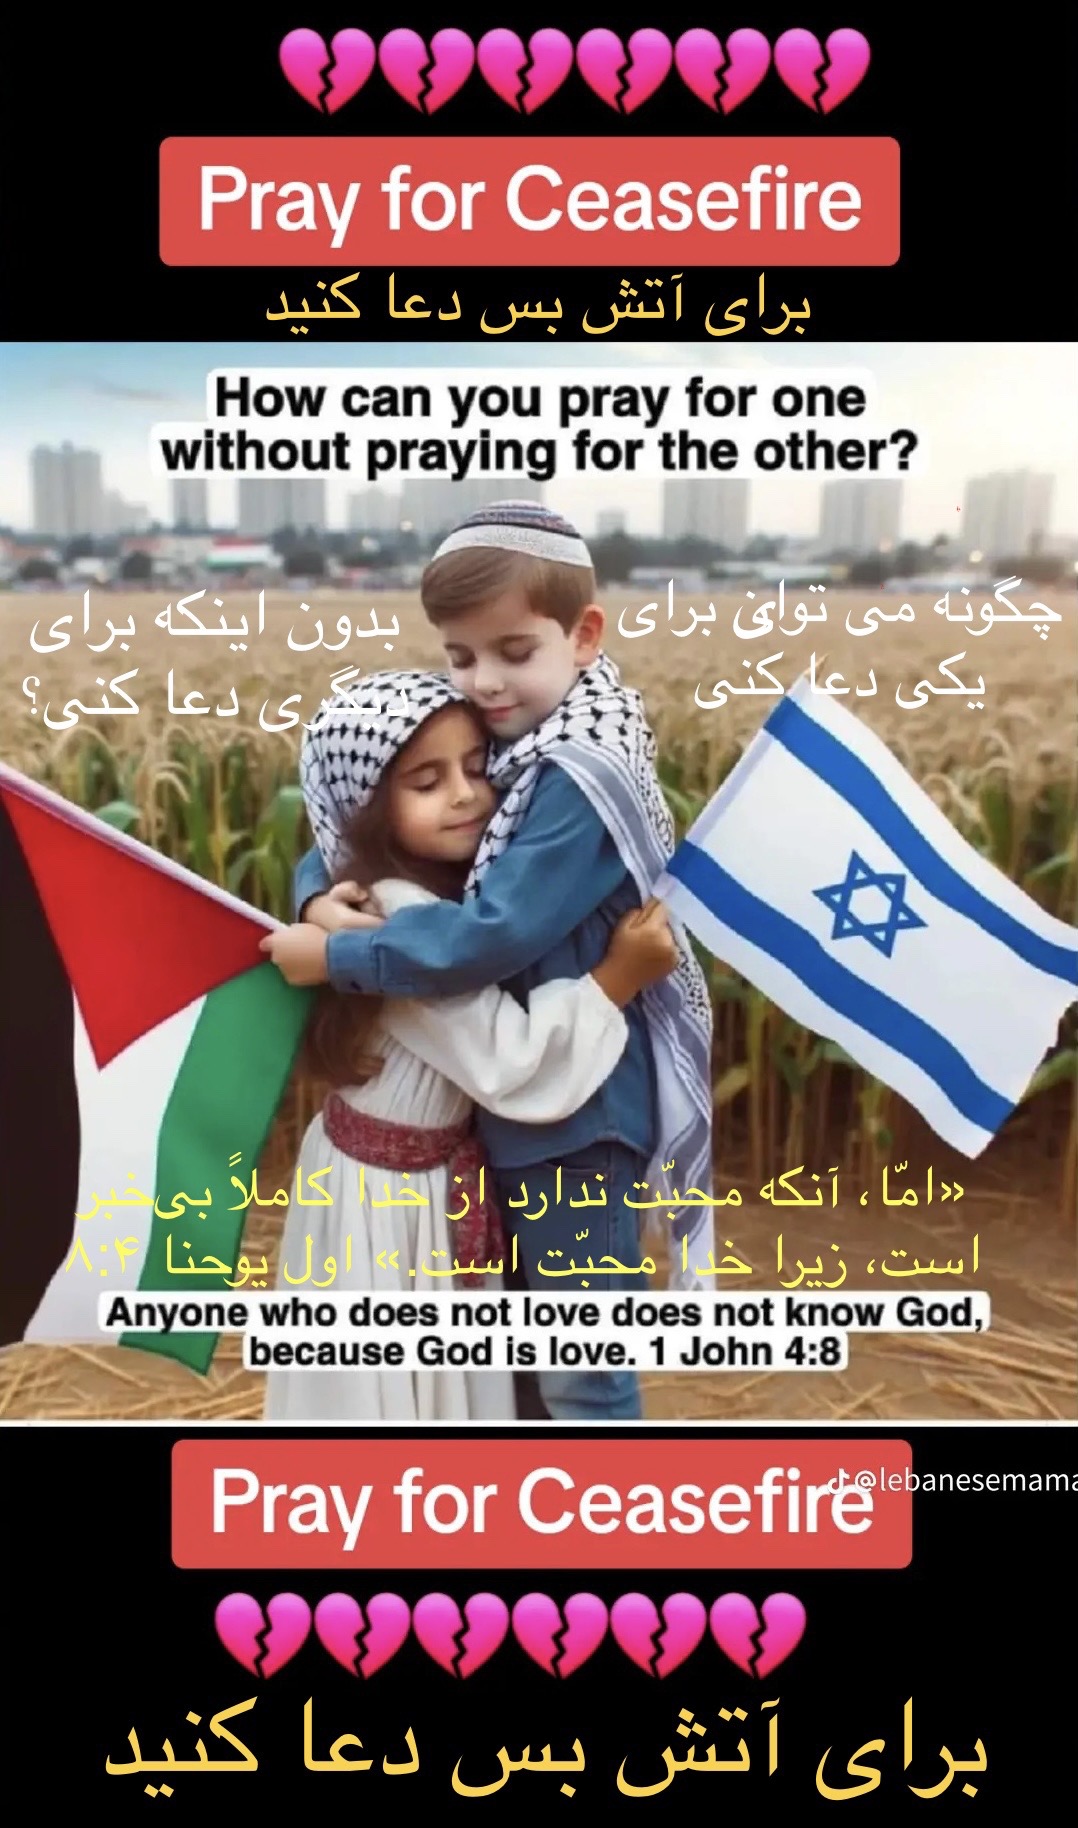 Pray for peace in Jerusalem, Pray for peace and protection of Israel and Palestine, Pray for Cease fire and end of war between Israel and Hamas, Pray for protection of Children in Gaza and Israel.